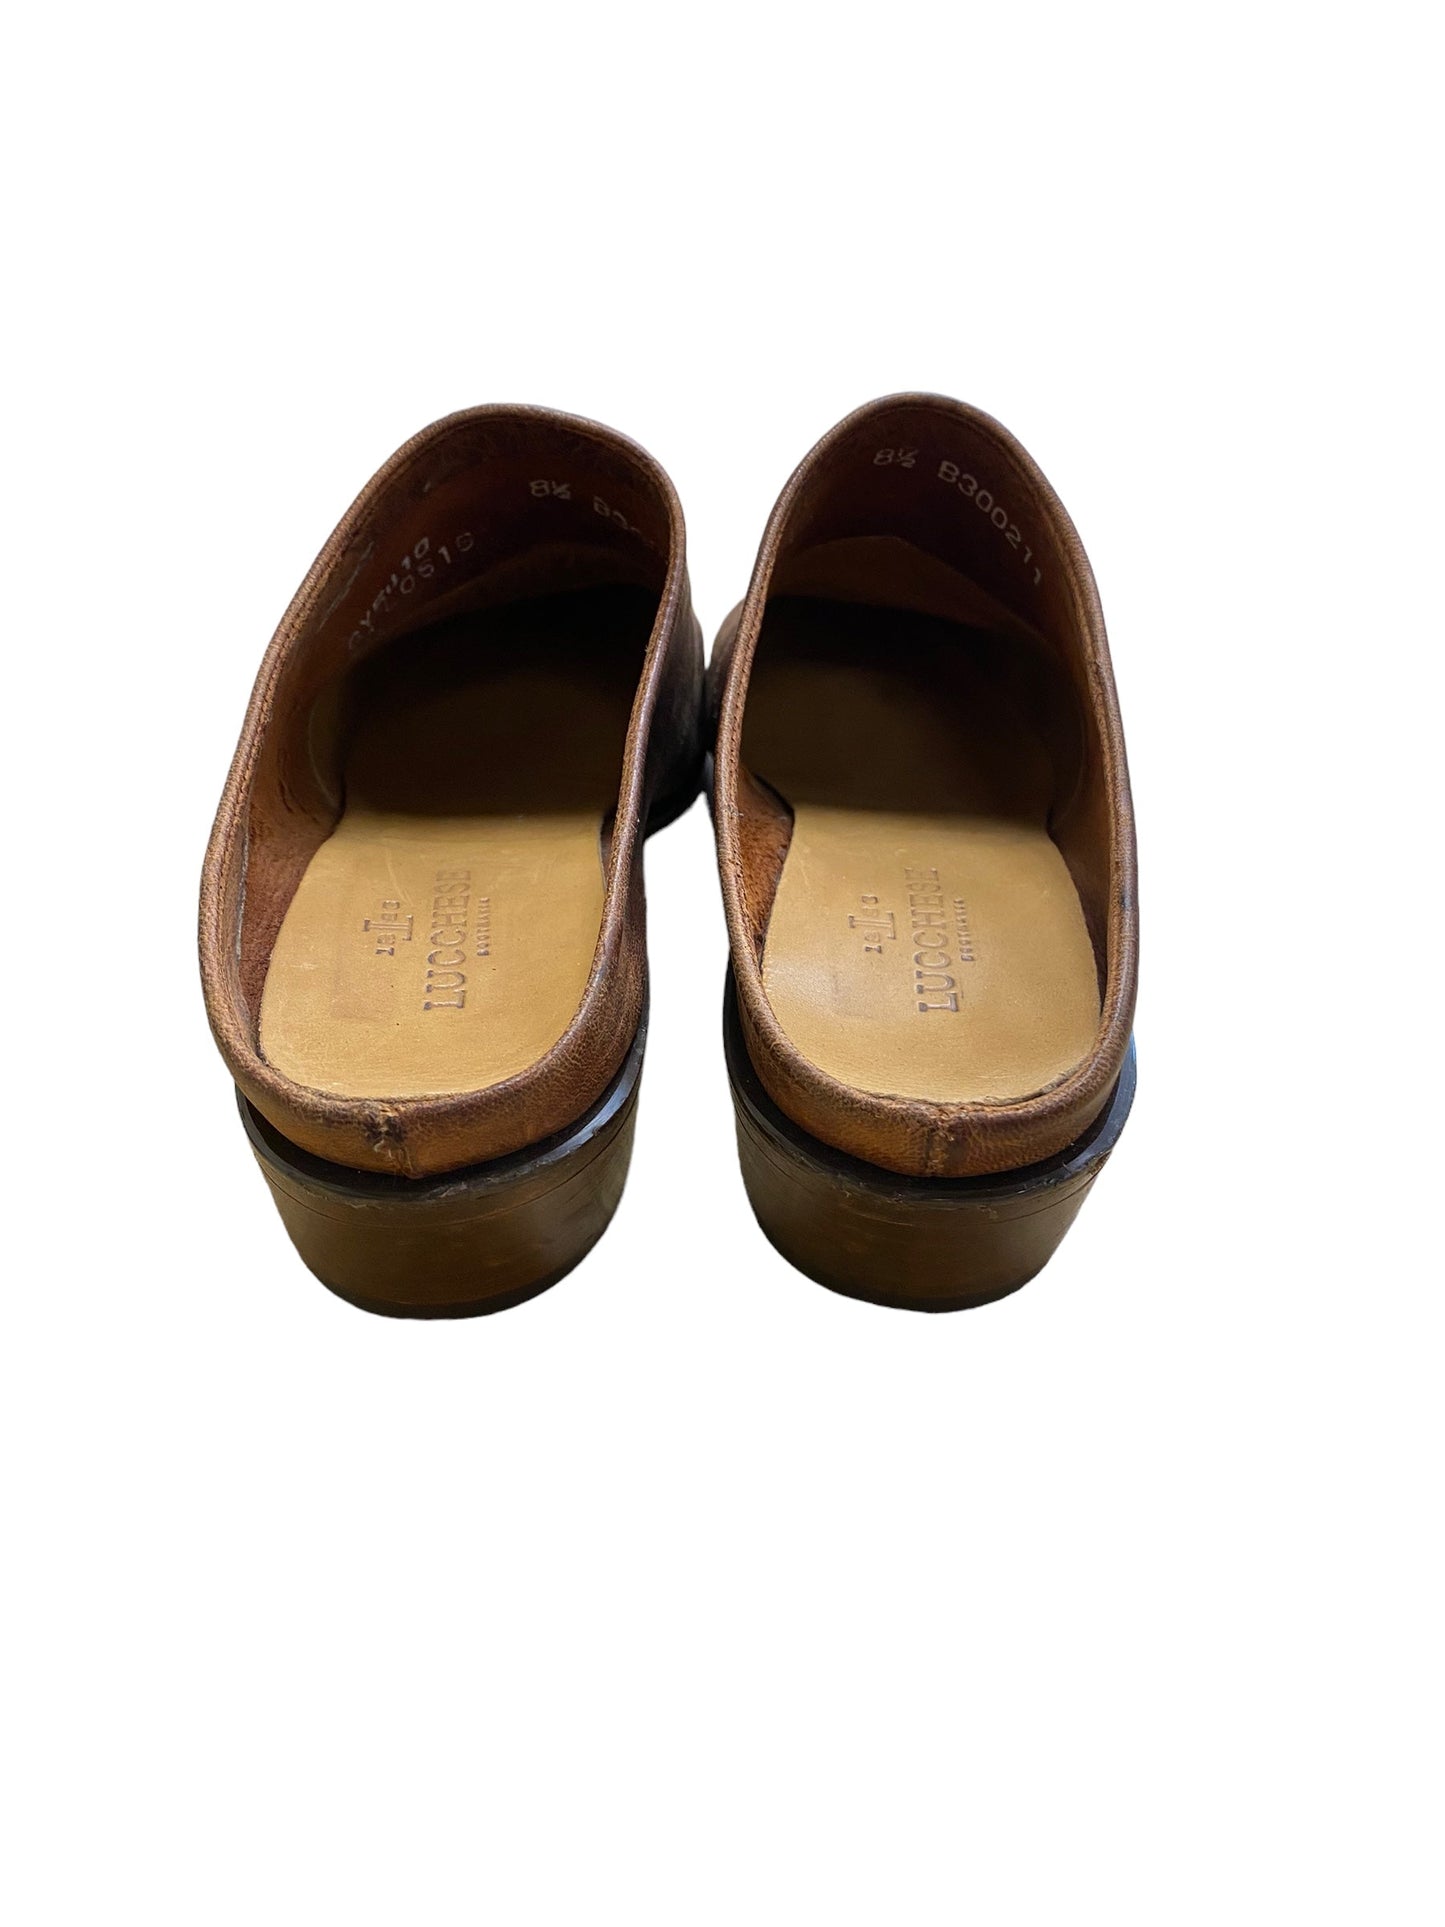 Shoes Flats By Lucchese  Size: 8.5